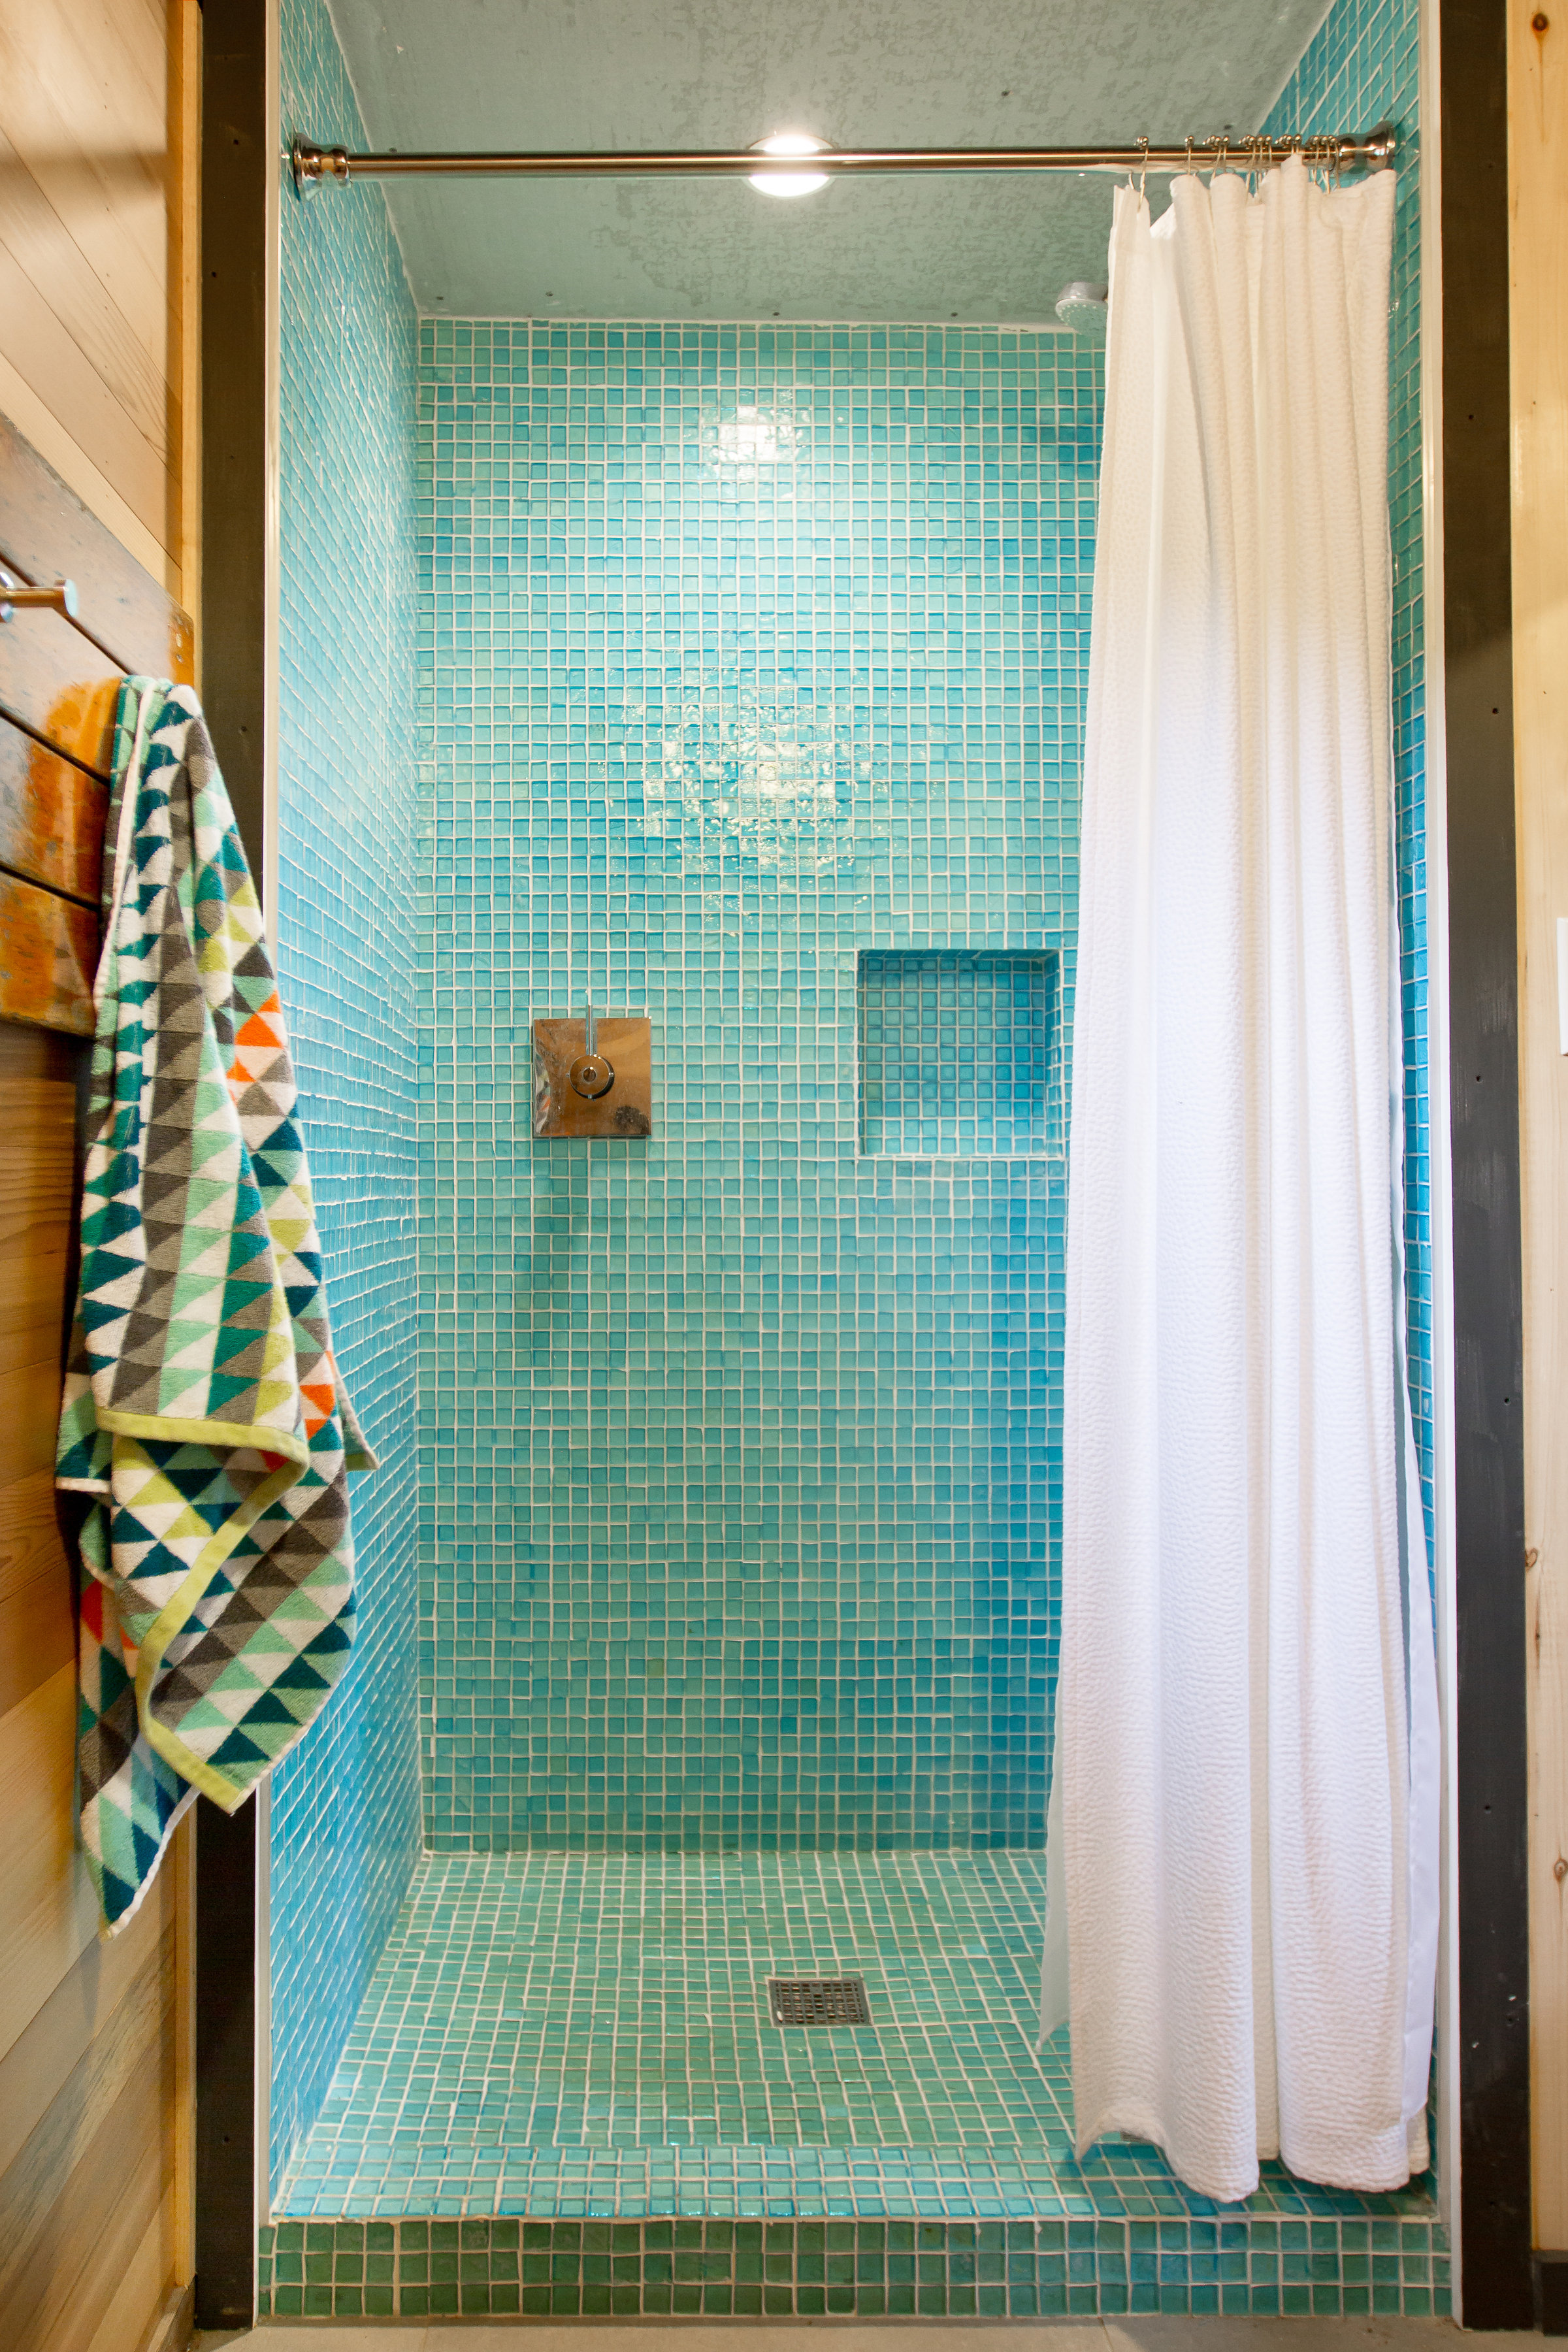 Aqua shower tile in mid-century modern boathouse designed by NewStudio Architecture